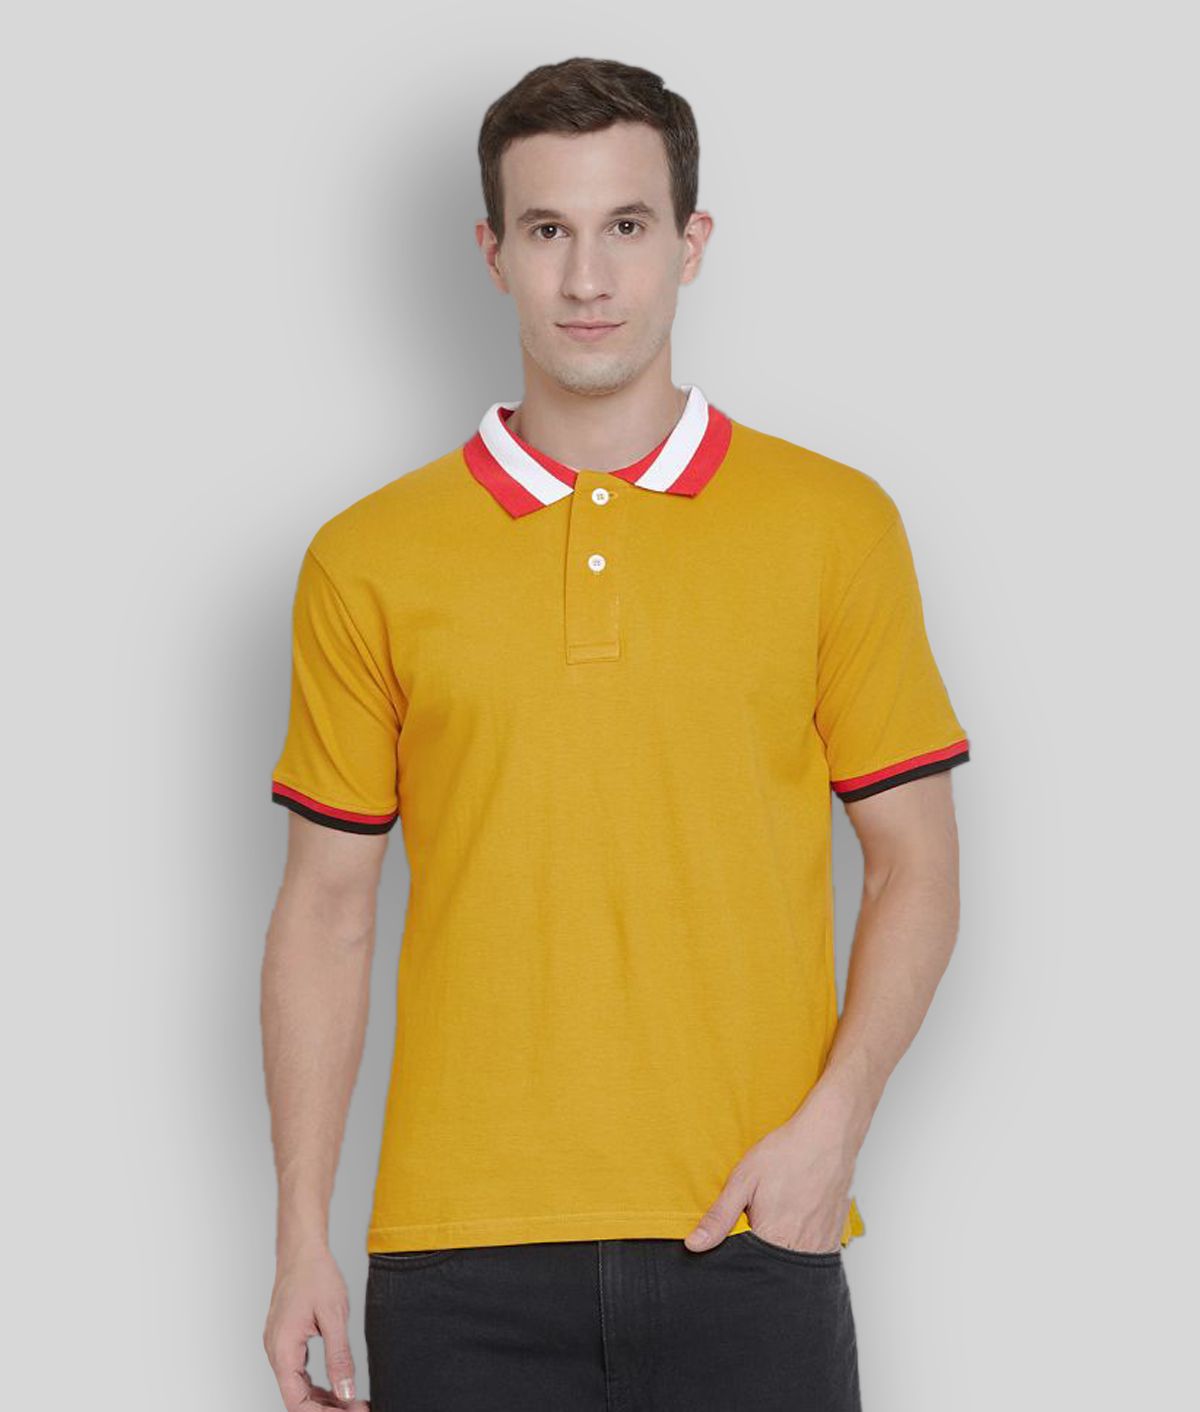 The Dry State - Yellow Cotton Slim Fit Men's Polo T Shirt ( Pack of 1 )